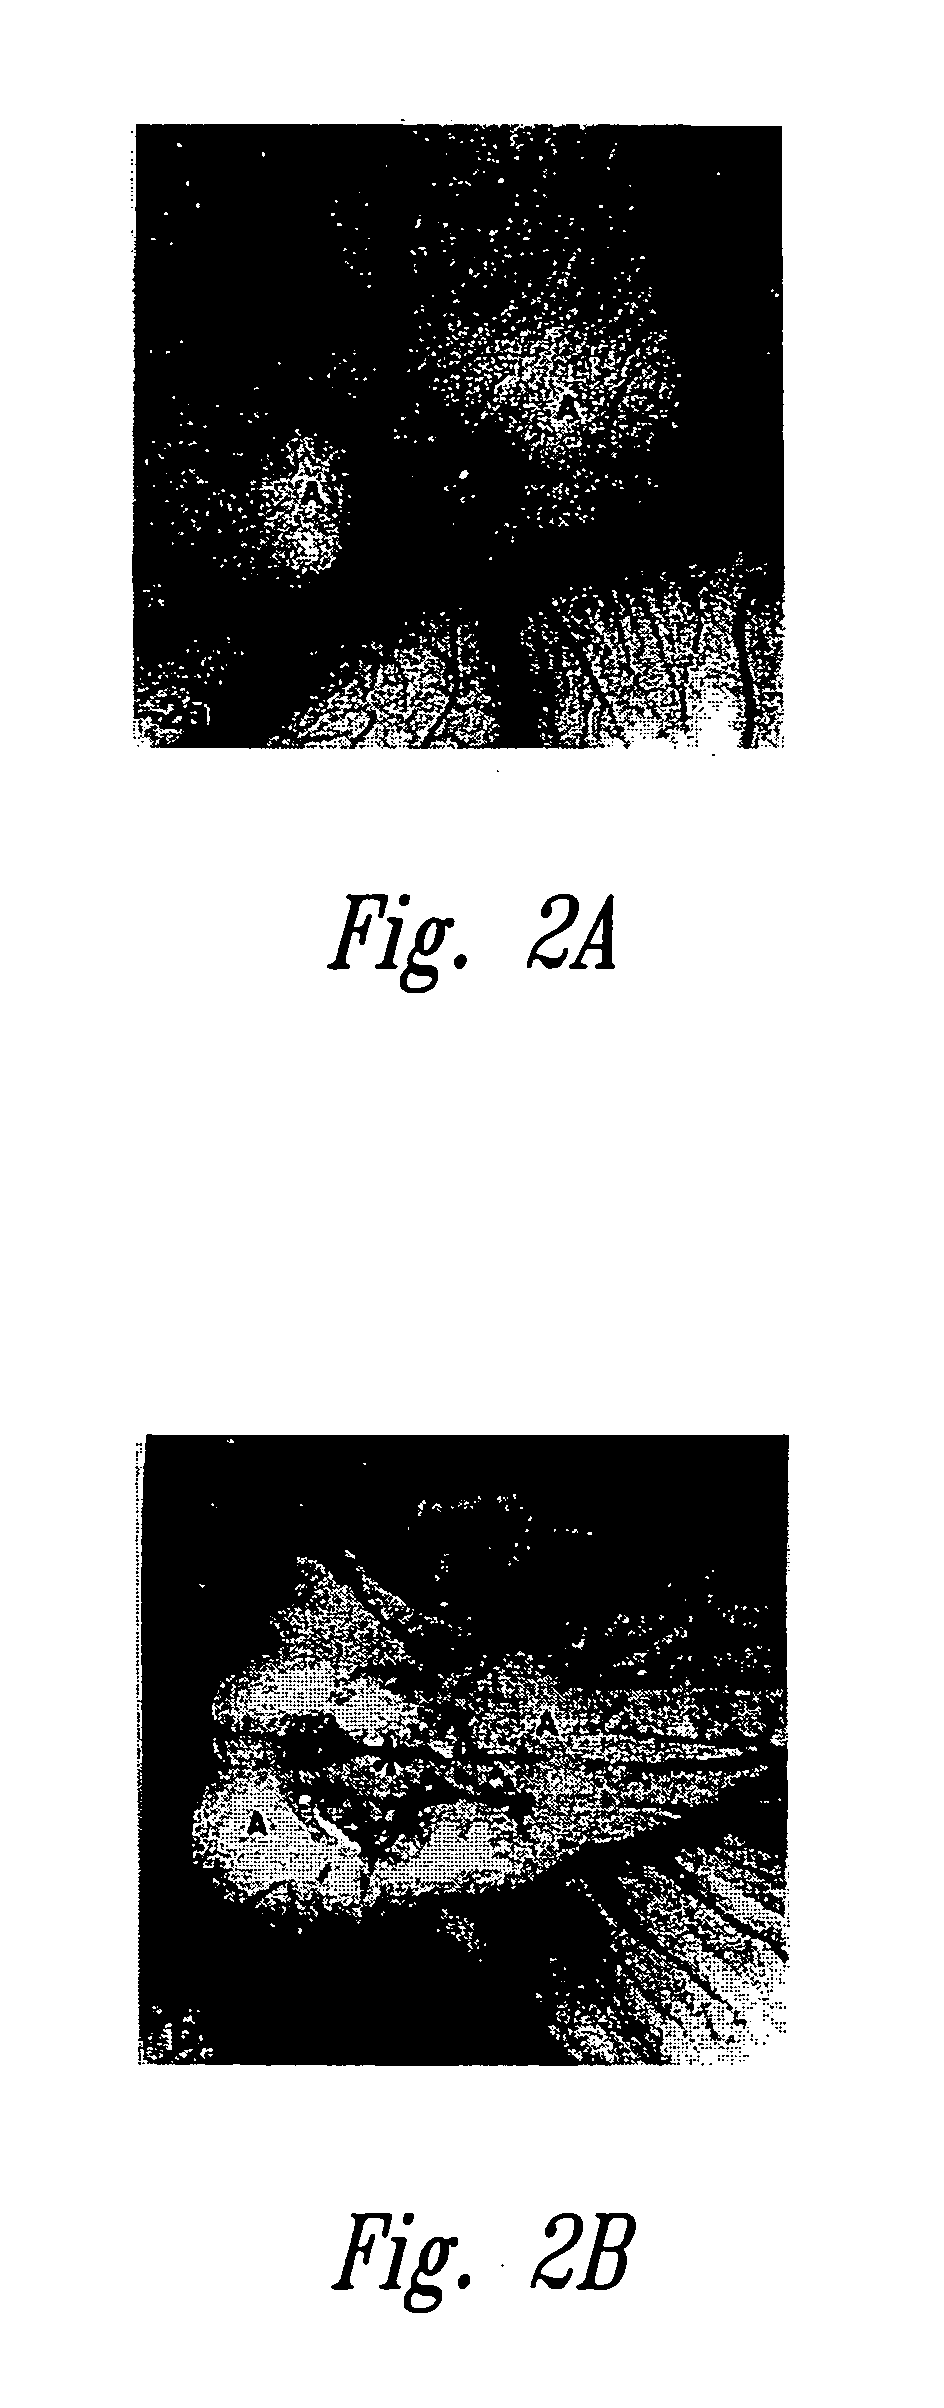 Anti-angiogenic compositions and methods of use